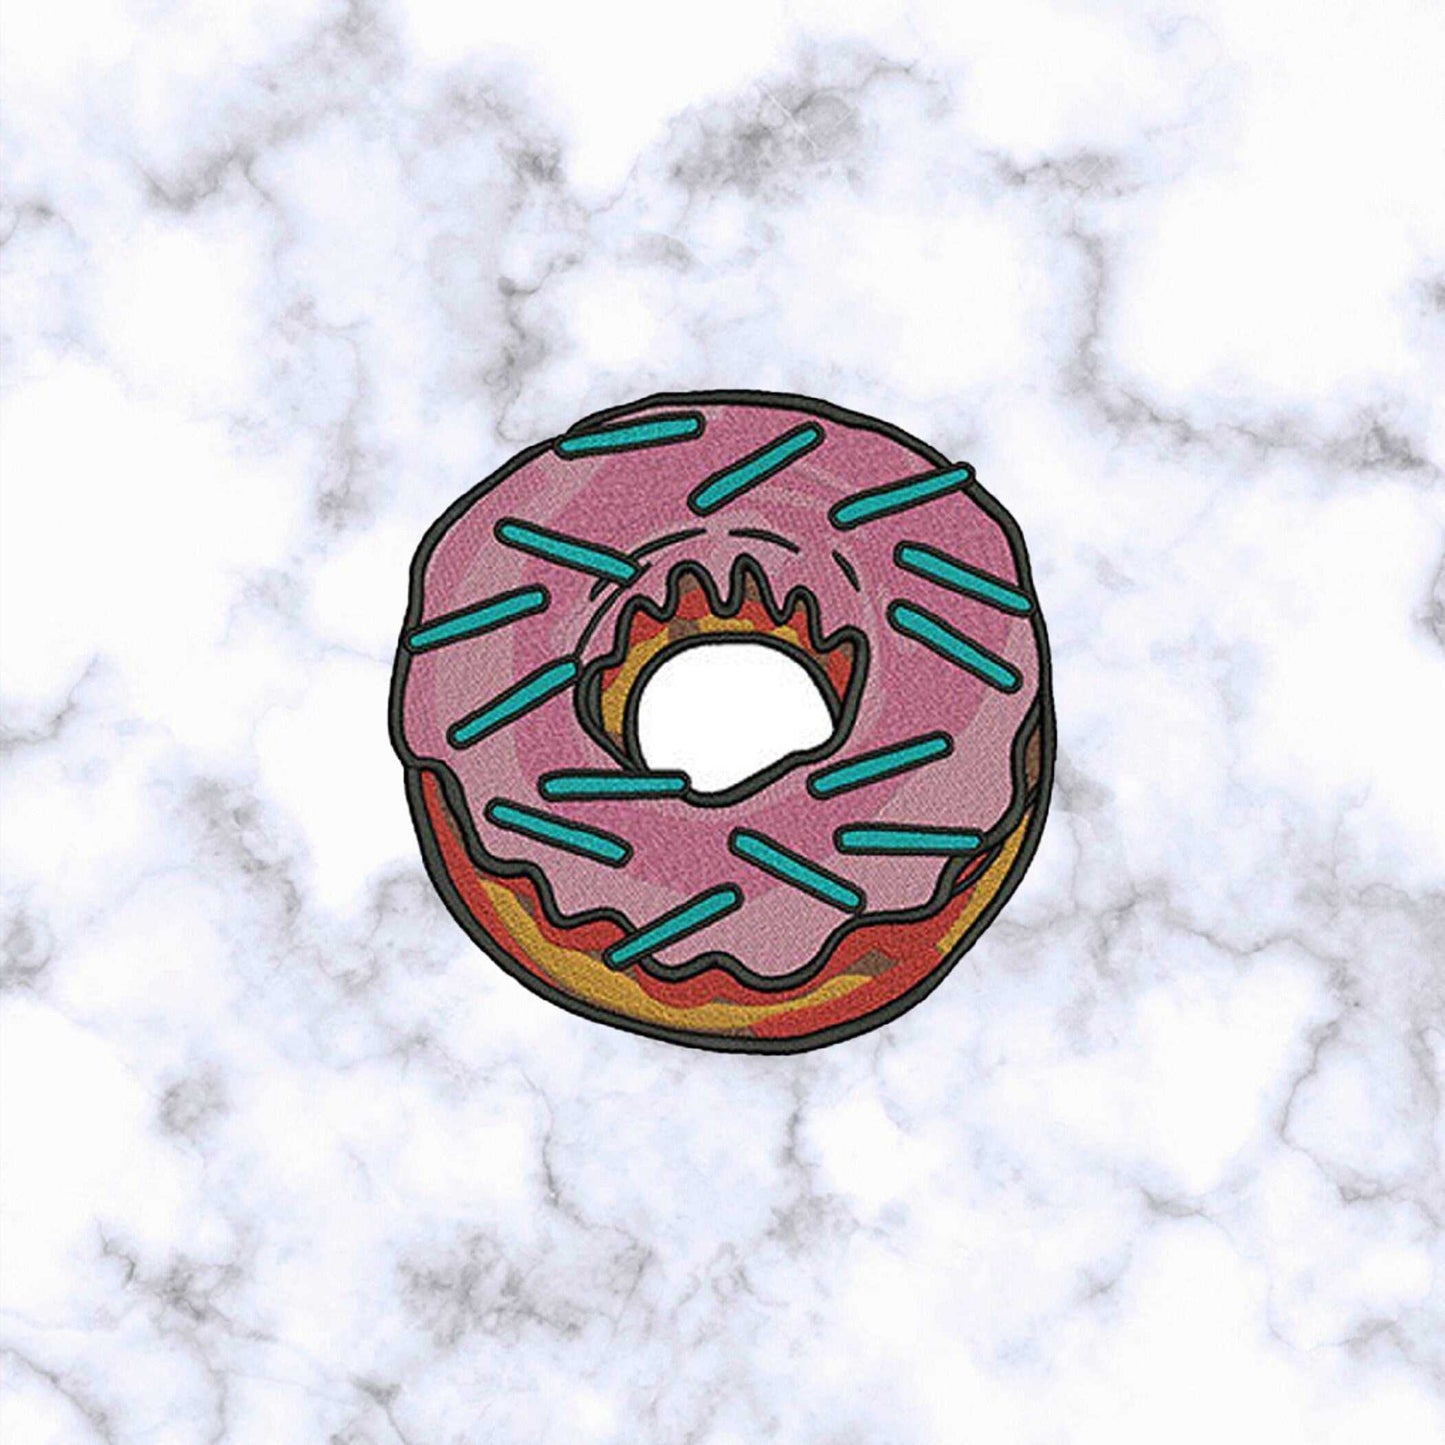 Iron on Patches / Sew on embroidered patches - Creamy Donut Iron on Patch Embroidery Patchwork -Food Donut DIY Badge for Clothing